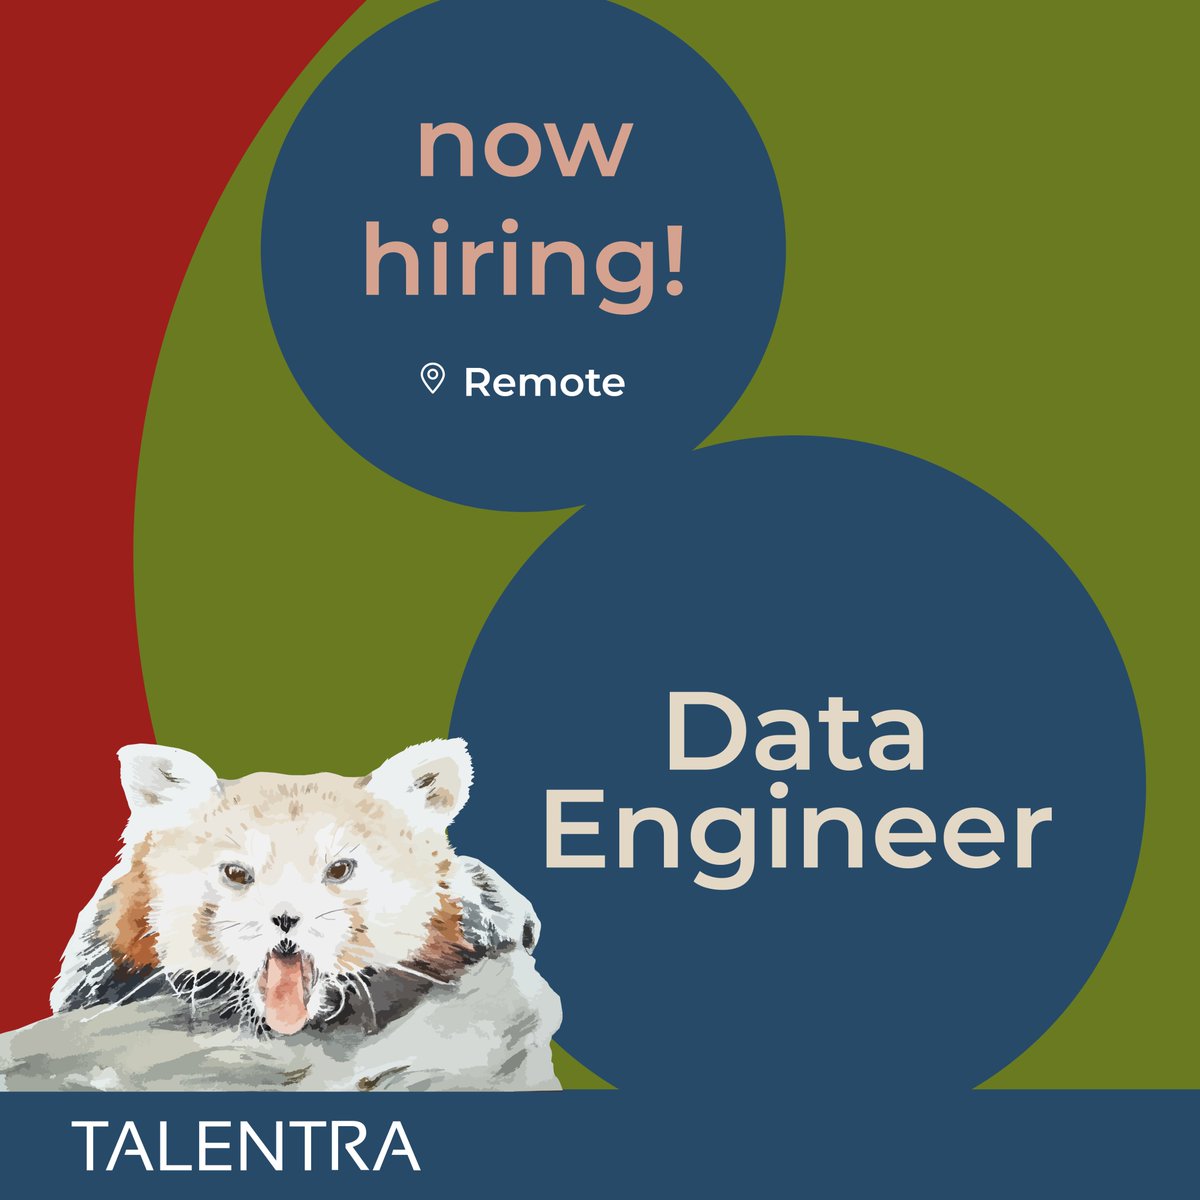 We are looking for a Data Engineer for our well – known client who has mostly overseas projects in digital solutions.

To Apply: 
talentra.zohorecruit.com/jobs/Careers/2…

#dataengineering #dataengineer  #nowhiring #remote #jobads #verimühendisi #işilanı #kariyer